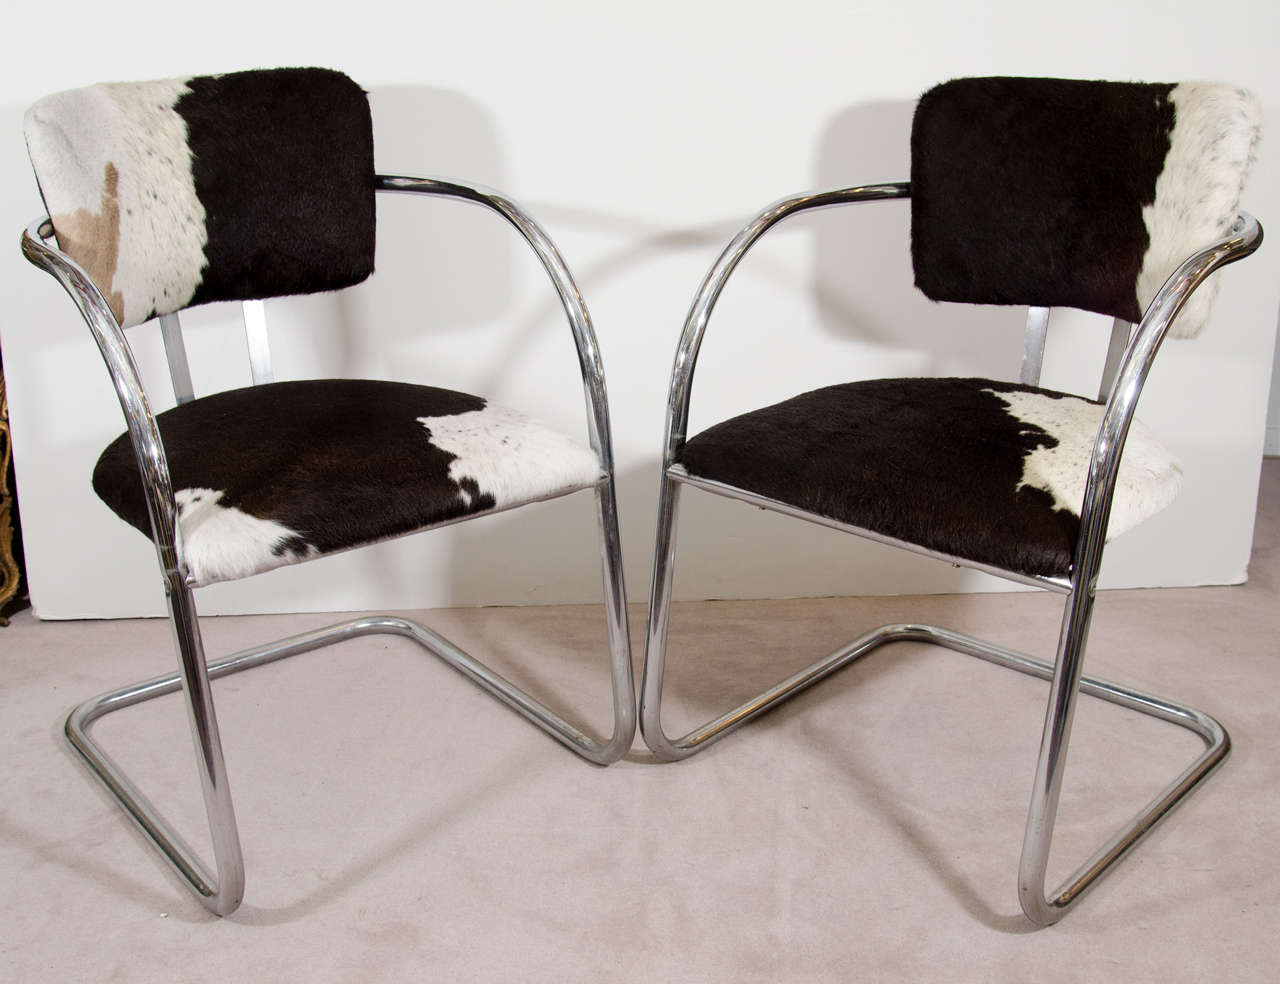 A 1930s pair of KEM Weber chairs with chrome frame. Newly upholstered in cowhide.